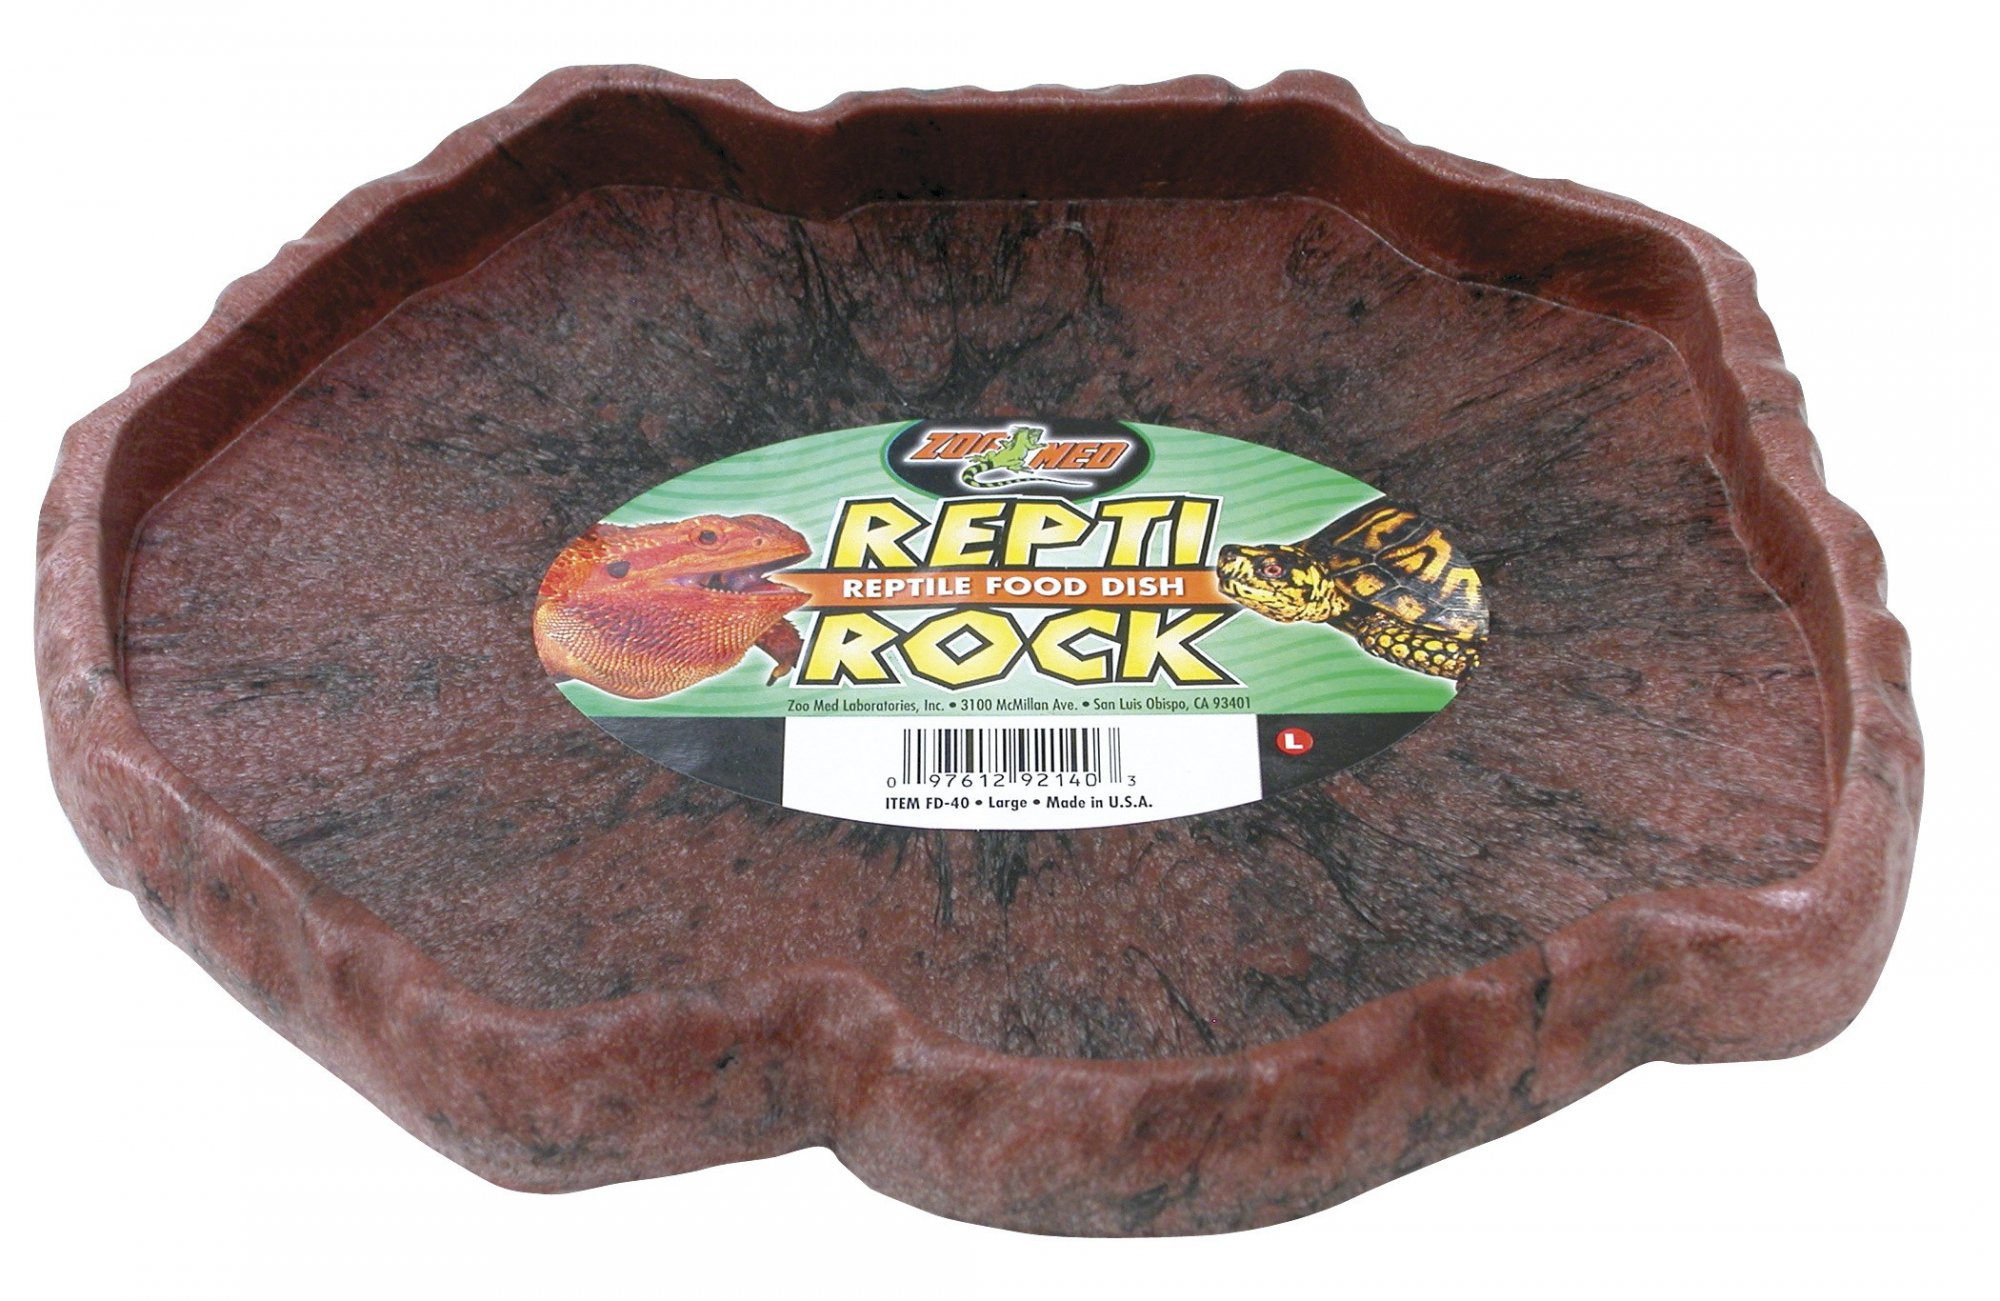 Gamelle basse pour reptiles ReptiRock ZooMed - 4 tailles disponibles